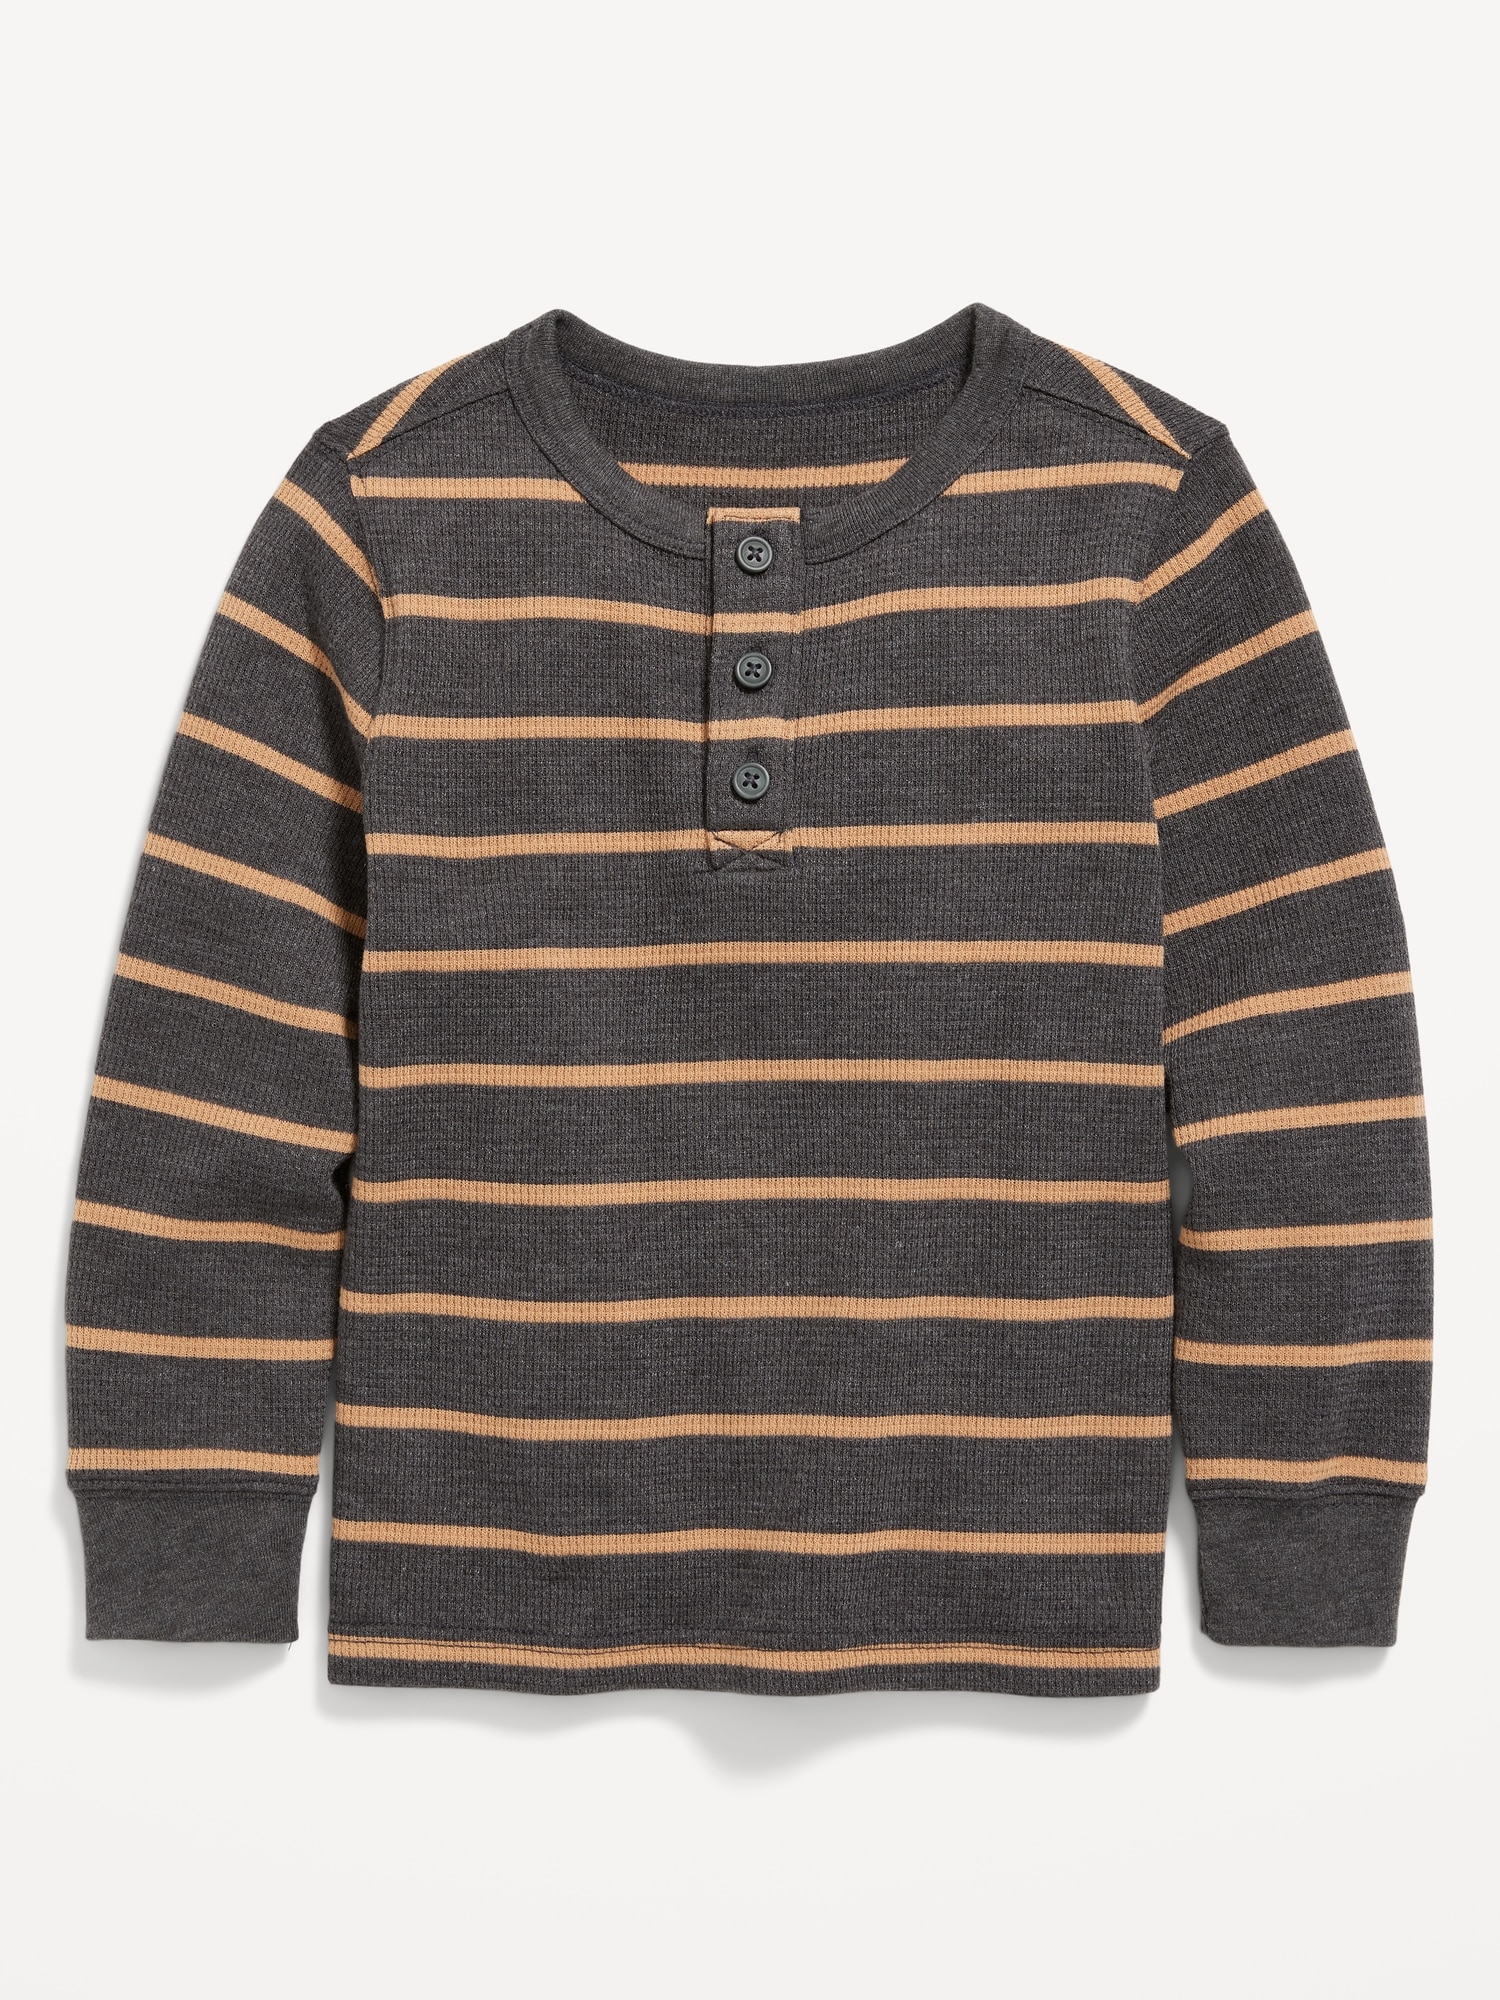 Long-Sleeve Thermal Knit Henley T-Shirt for Toddler Boys | Old Navy